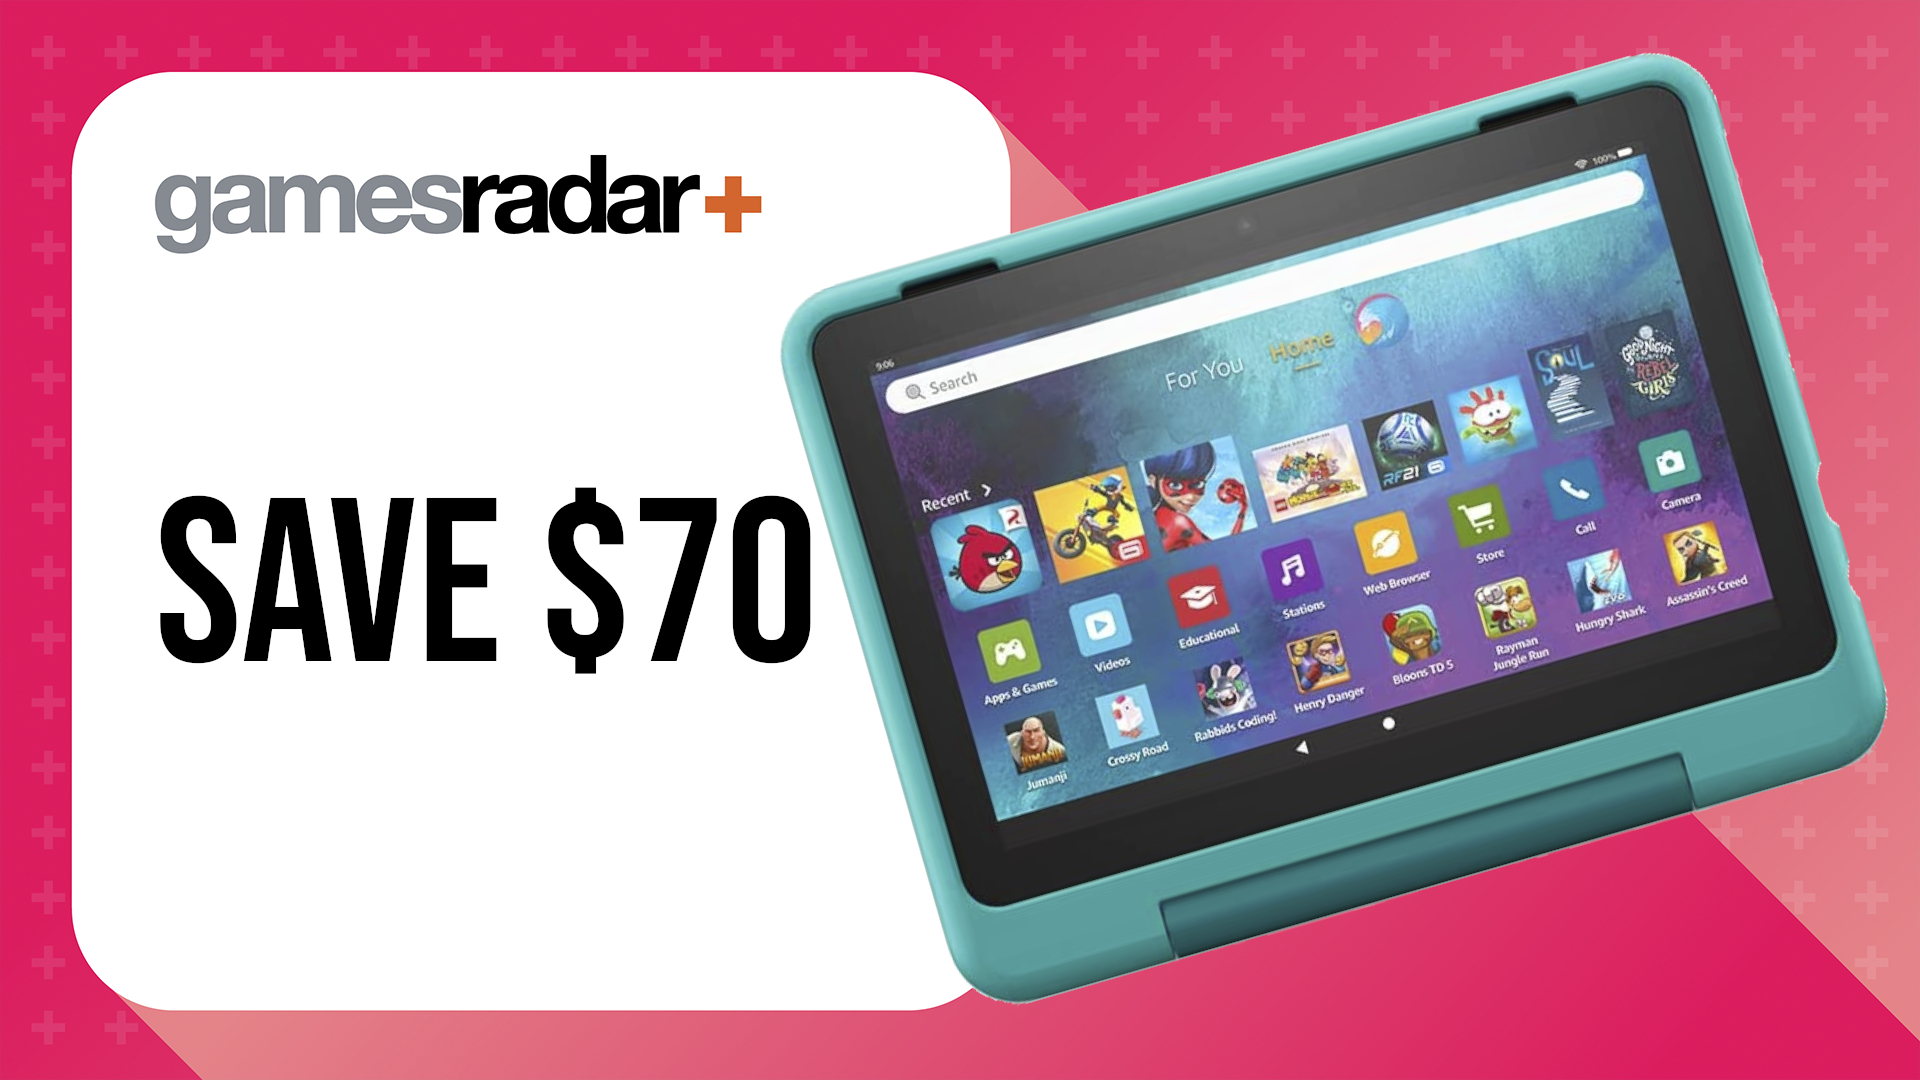 Cyber Monday toy deals with Amazon Fire HD 8 Pro